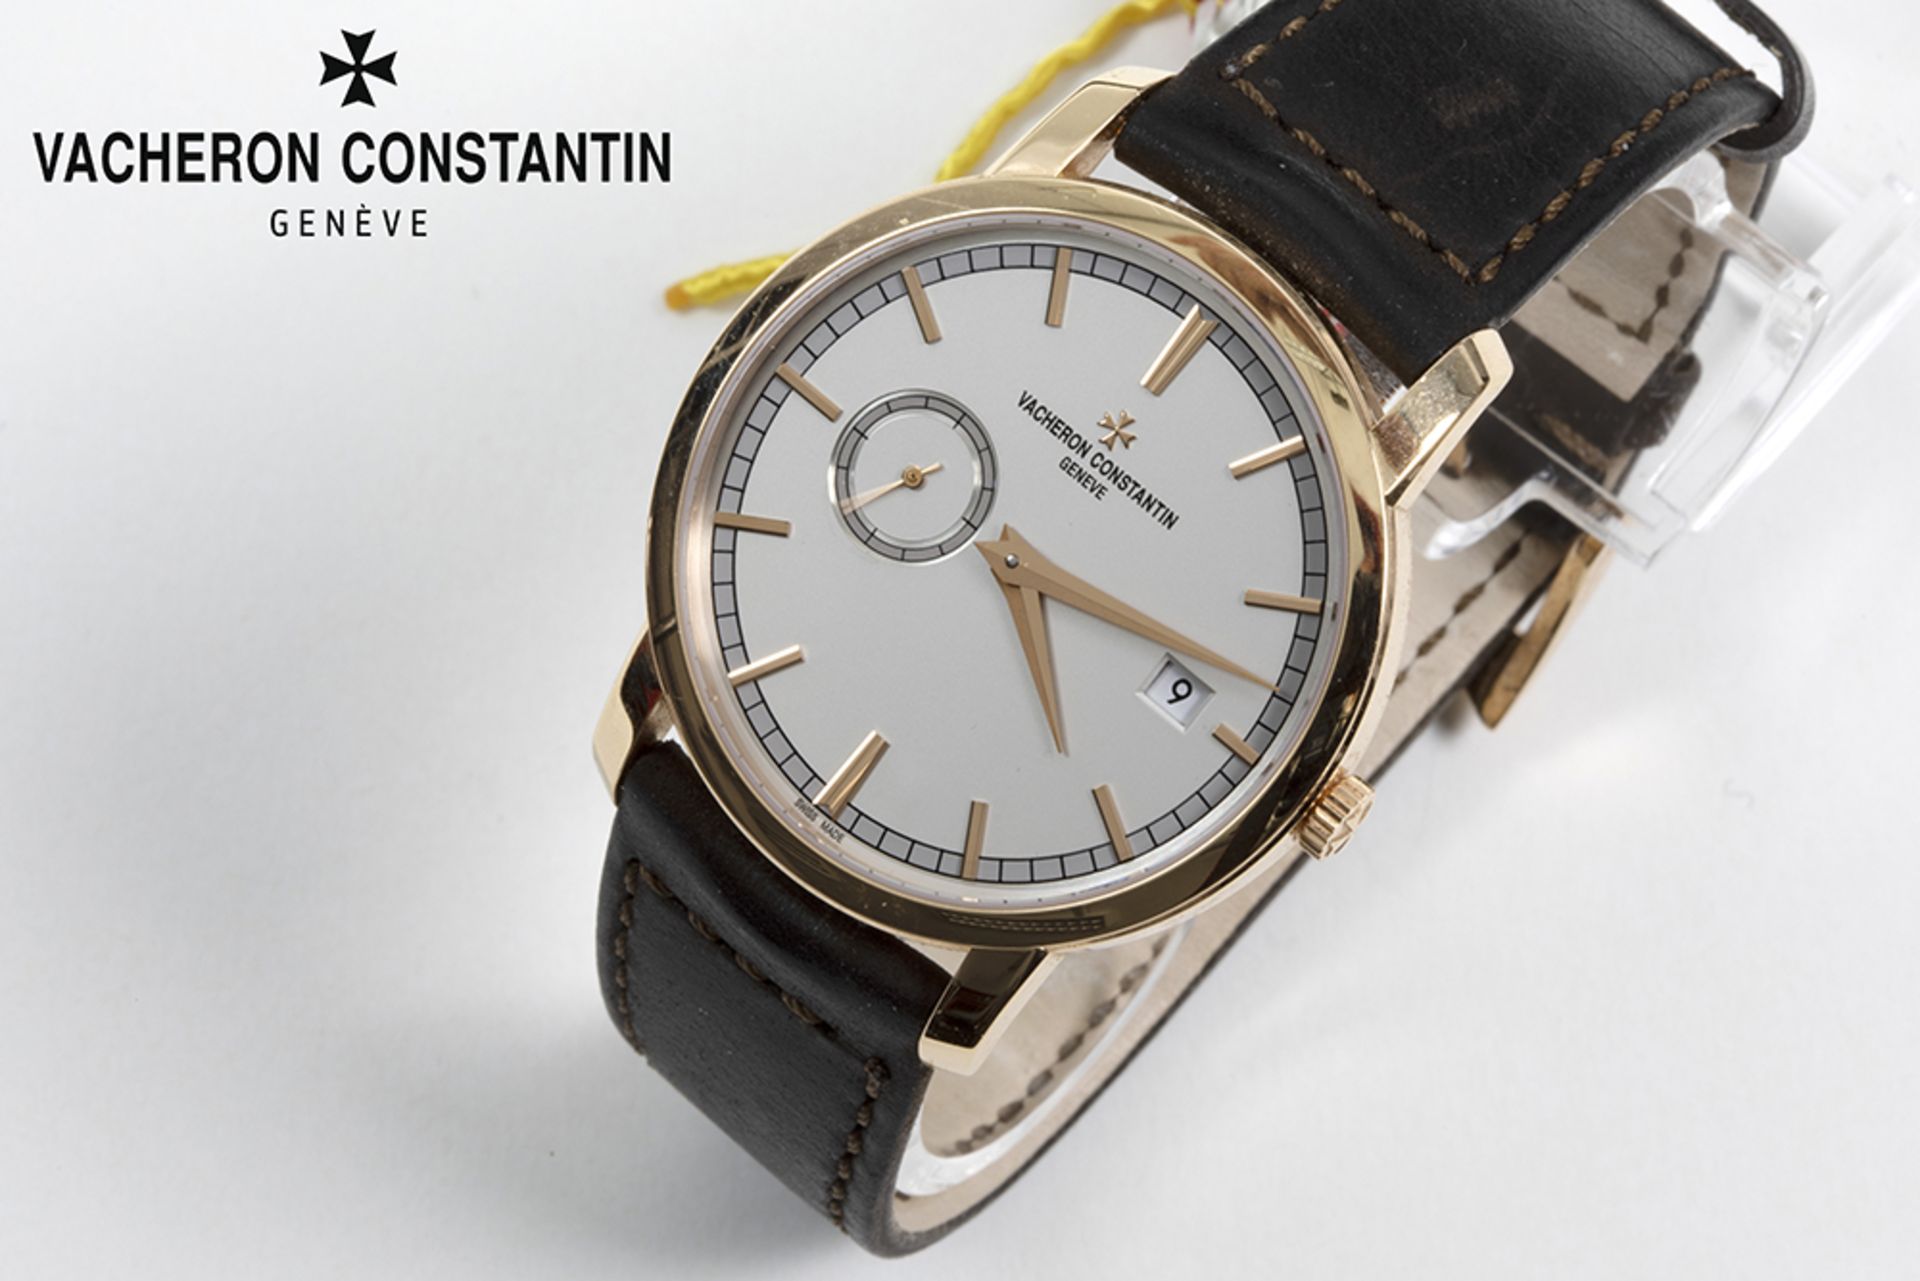 completely original automatic "Traditional Gentleman's dress-watch" in pink gold (18 carat) with